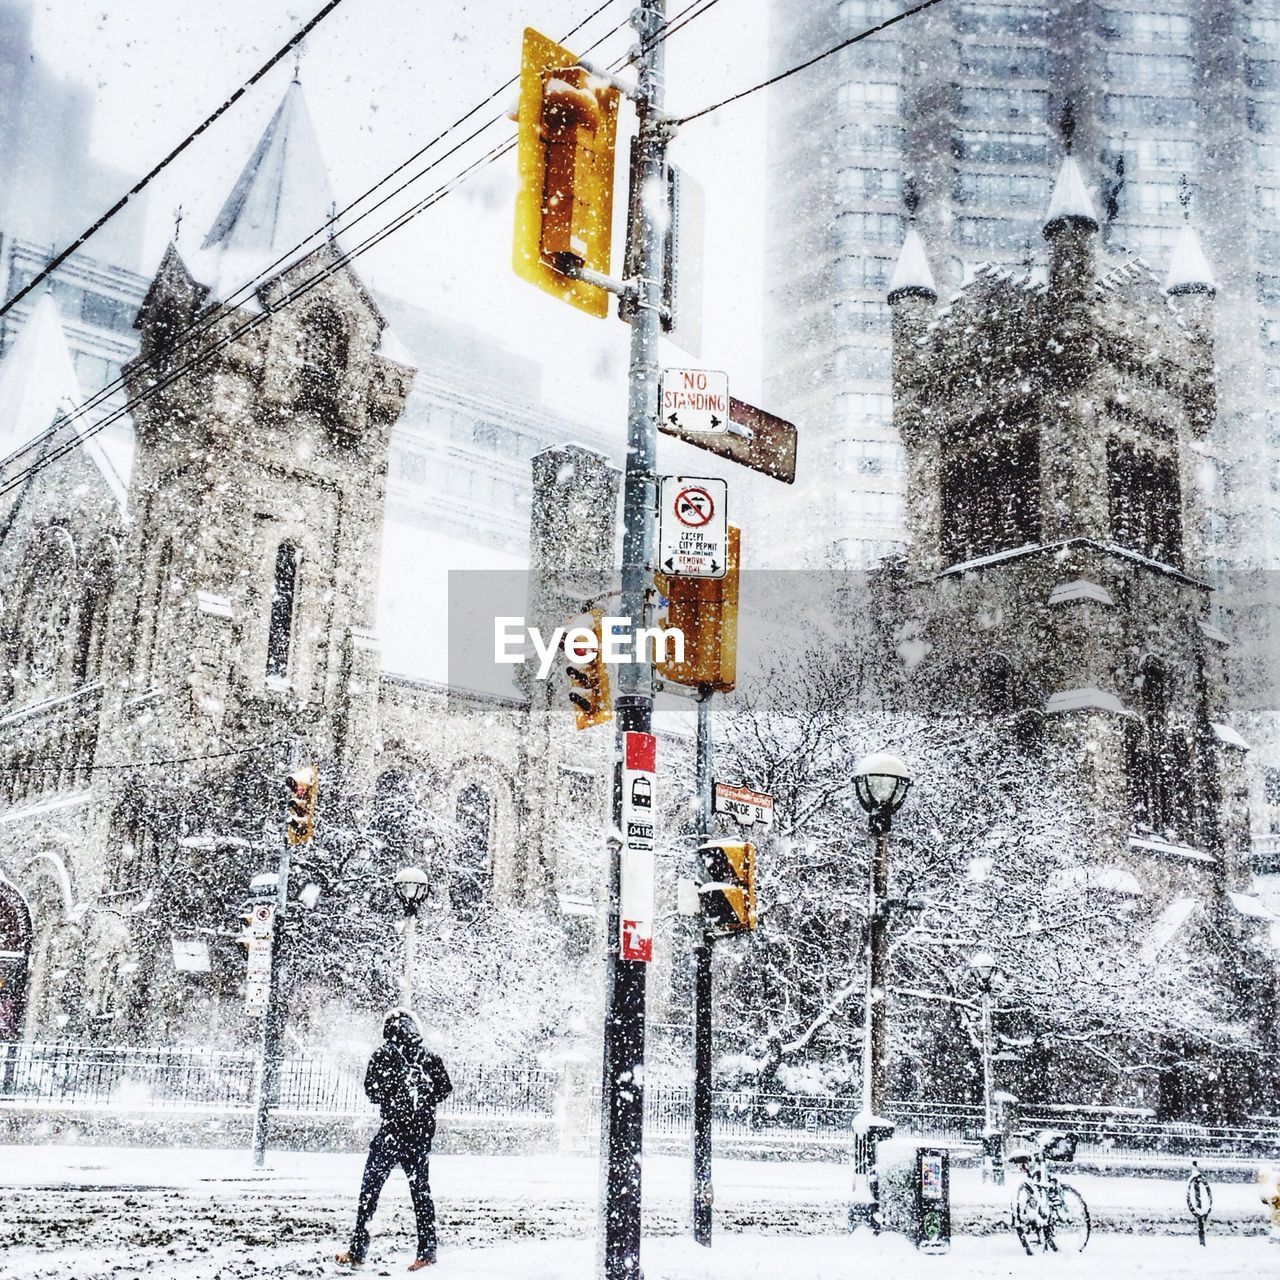 Buildings and street signs in snow